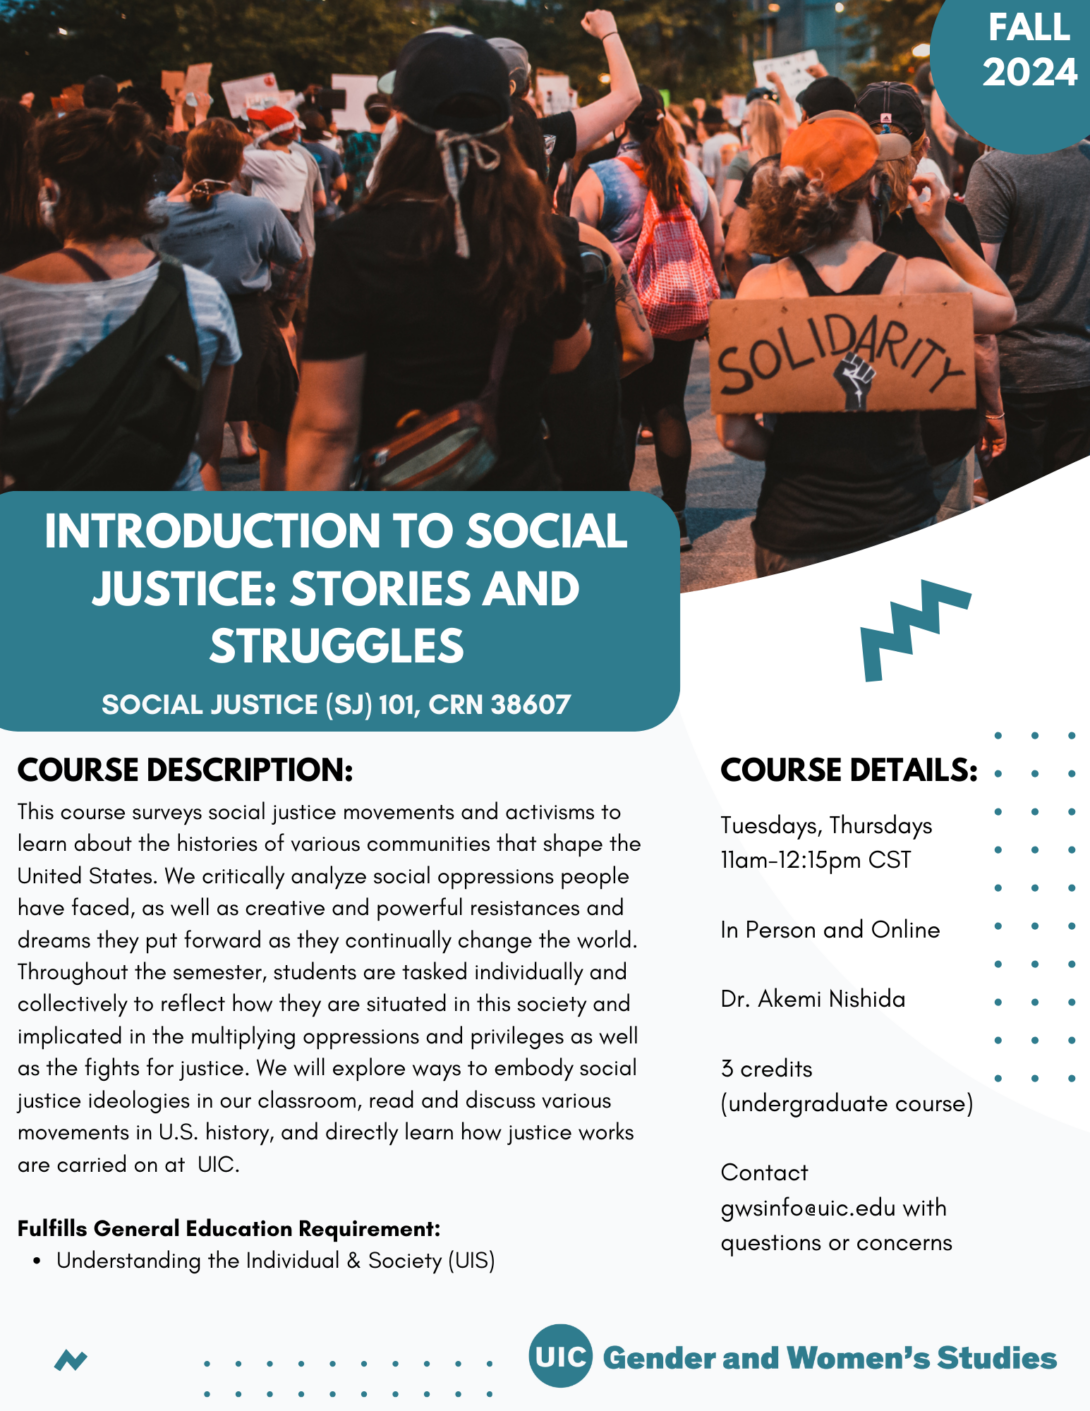 A flyer promoting the fall 2024 Introduction to Social Justice: Stories and Struggles course. The top portion of the flyer includes a photo of people marching at a protest. In the top right corner is a teal circle with Fall 2024 inside it in white text. The bottom left portion of the photo is covered with a teal block that includes the course title in white text. Below that is the course description and course details in black text on a white background. A teal GWS logo appears in the bottom right of the flyer. Parallel lines of teal dots and teal geometric designs decorate the page.